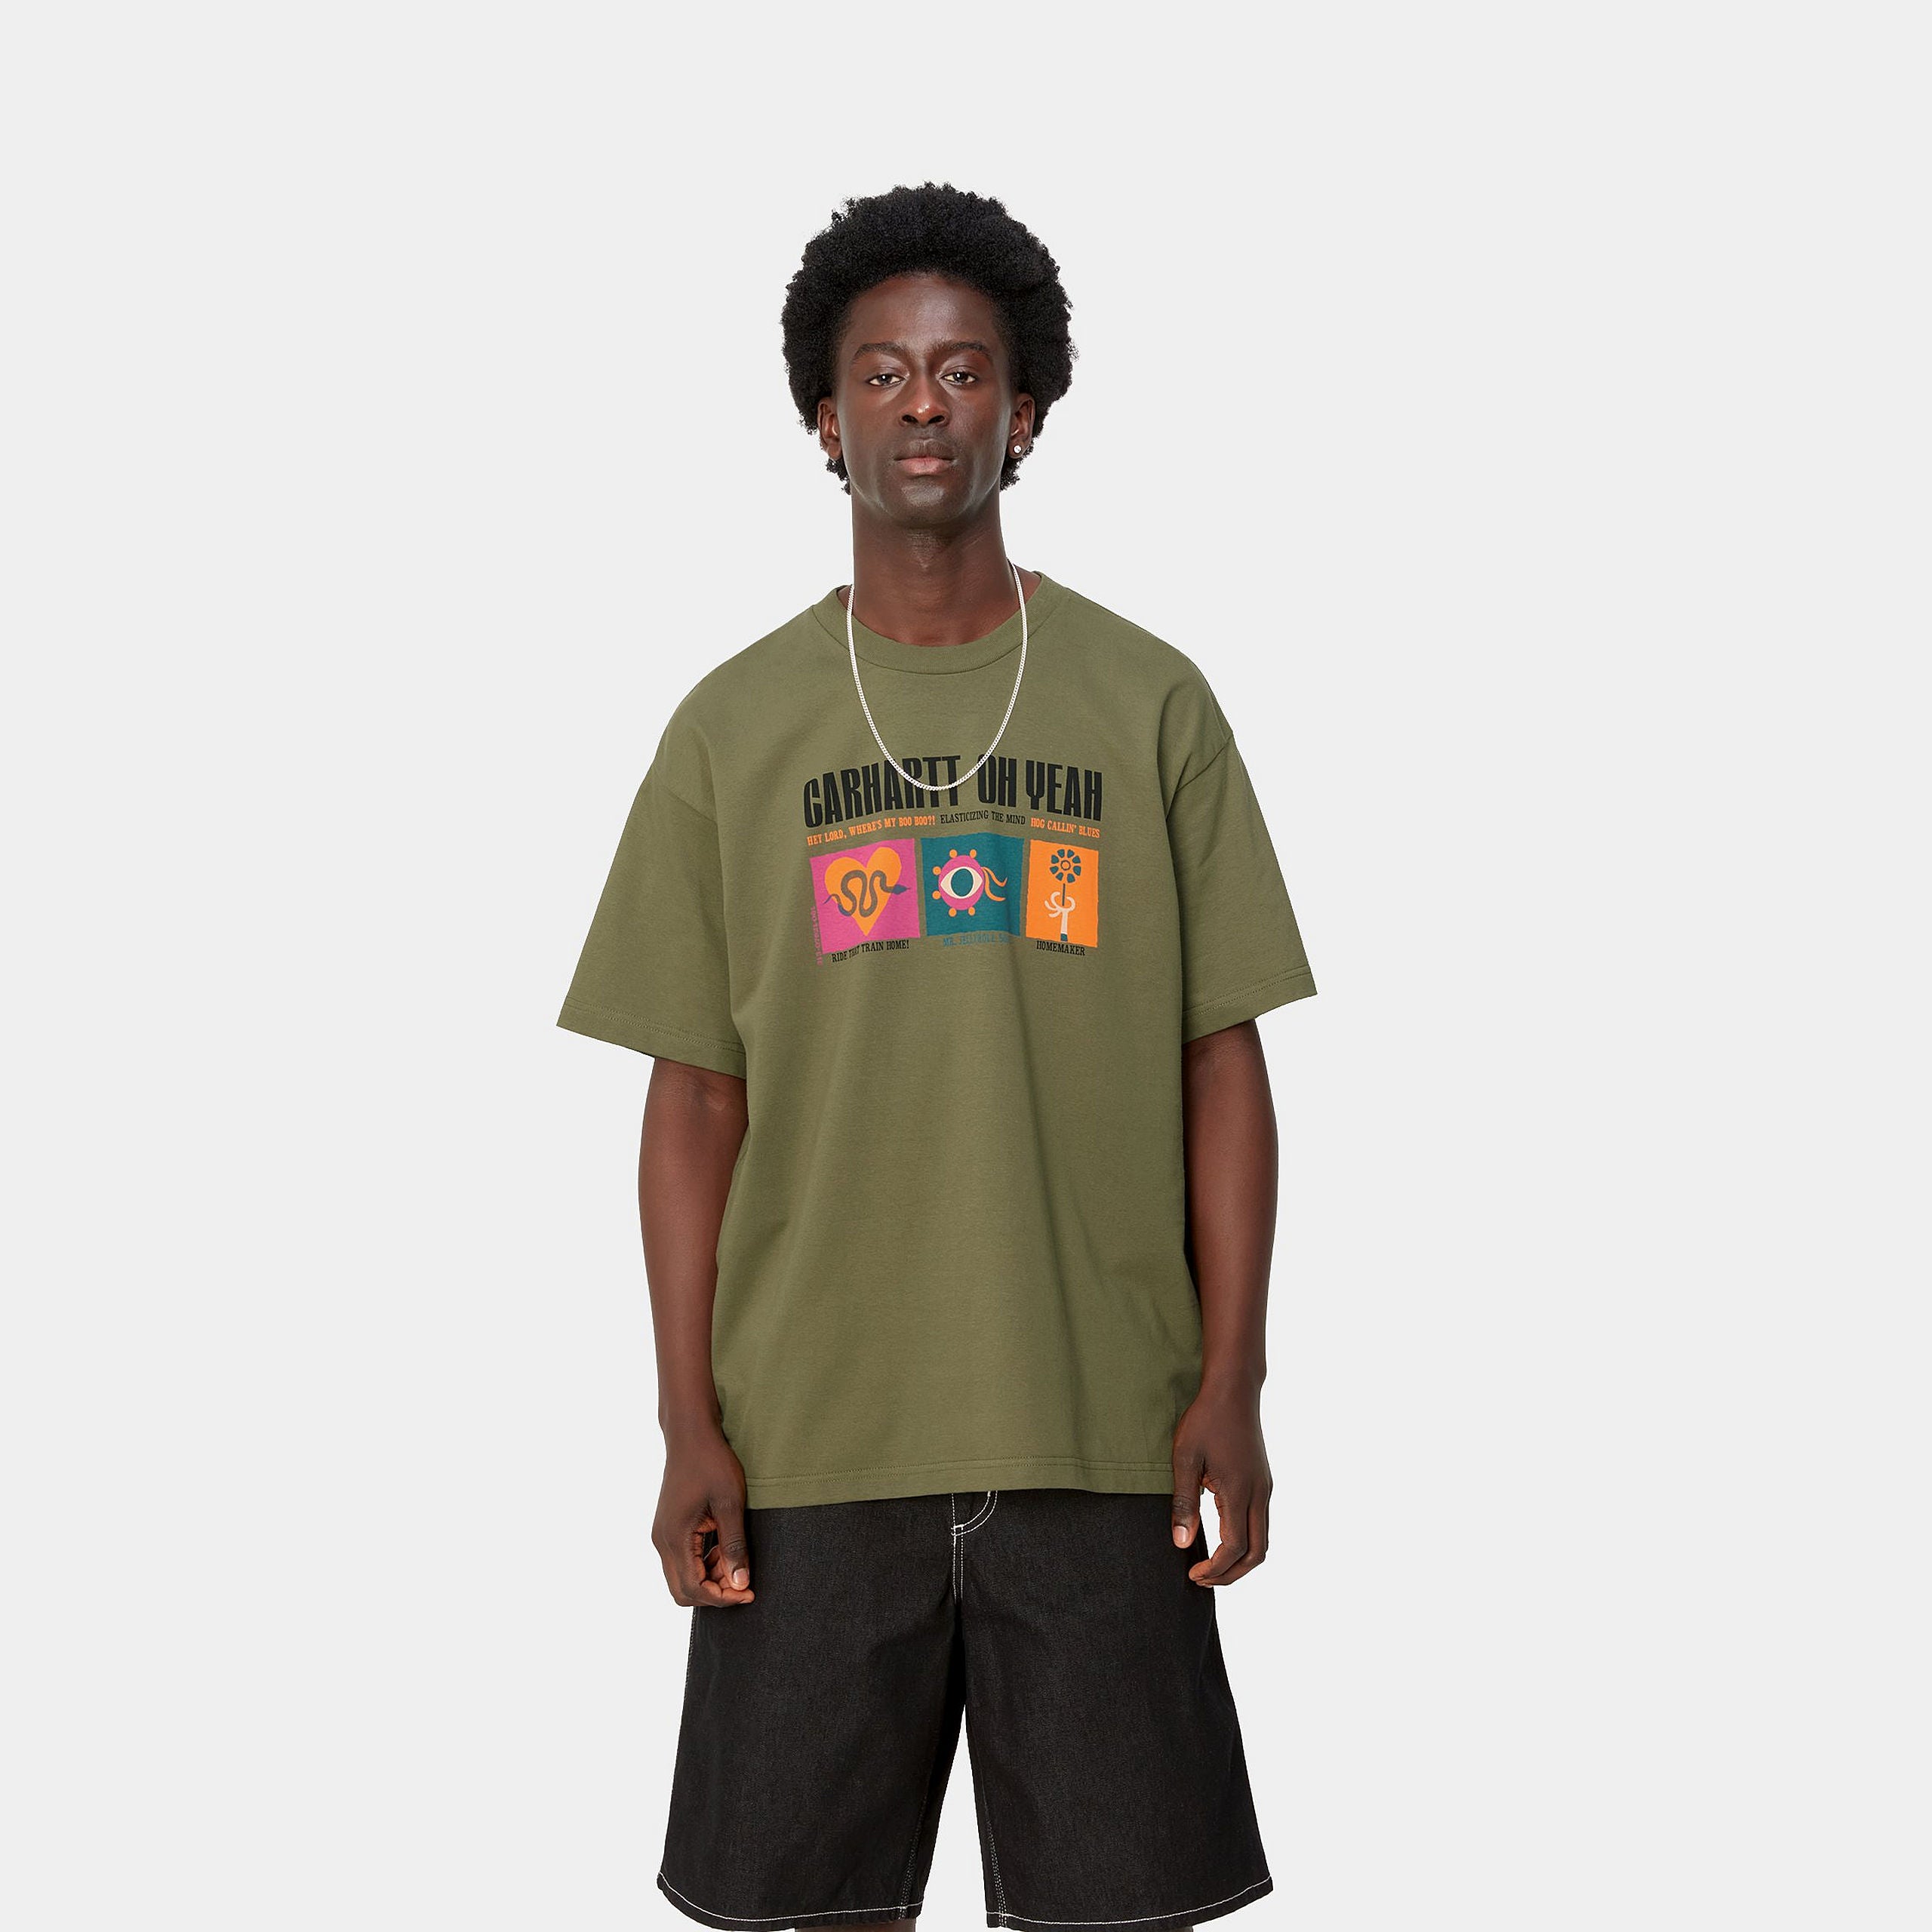 S/S OH YEAH T-SHIRT - Dundee